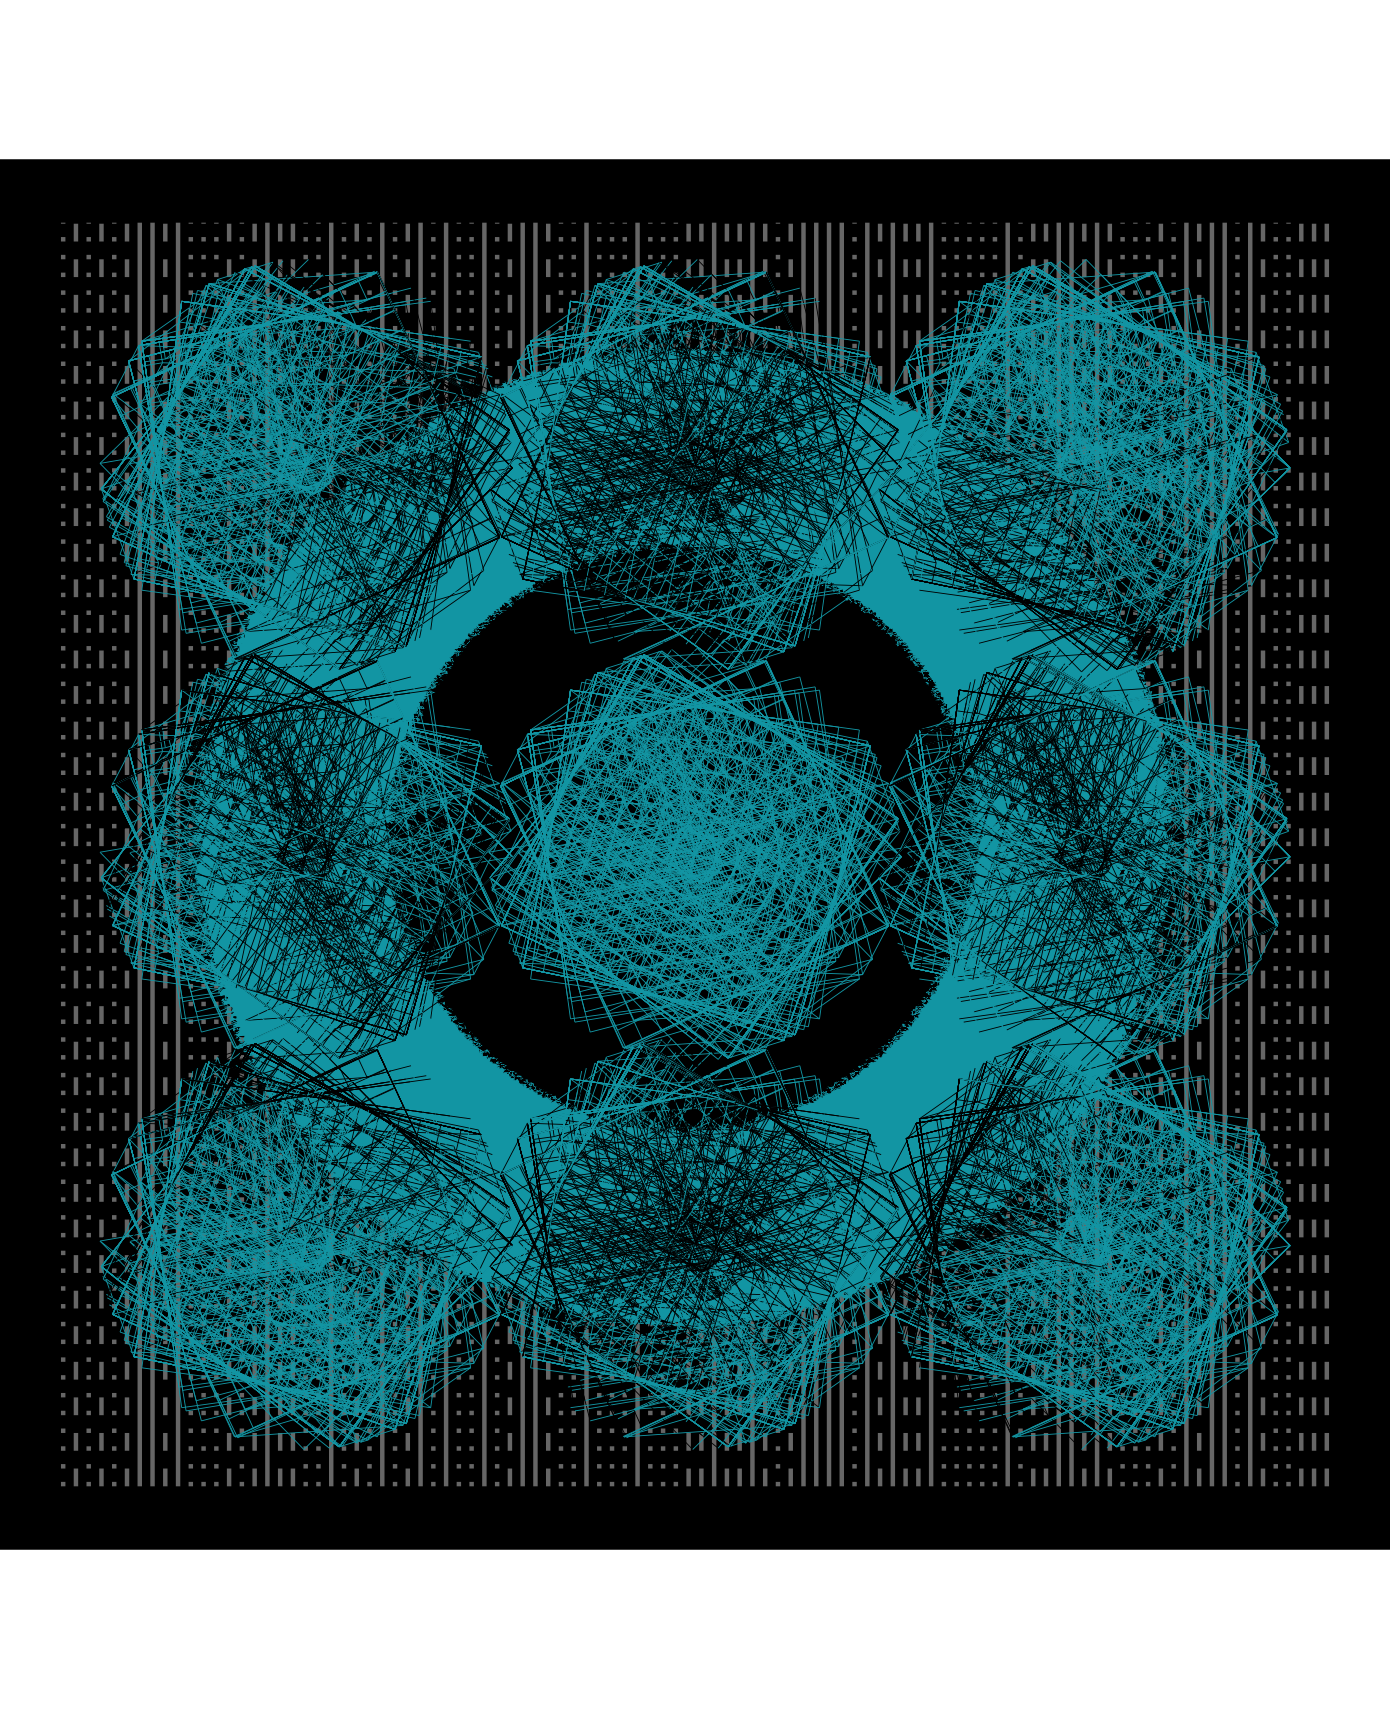 An abstract generative art piece with nine moire patterned turquoise diamonds in a grid. The background is black with faded and varied white patterned lines. In the center behind the diamonds is a turquoise donut shape.